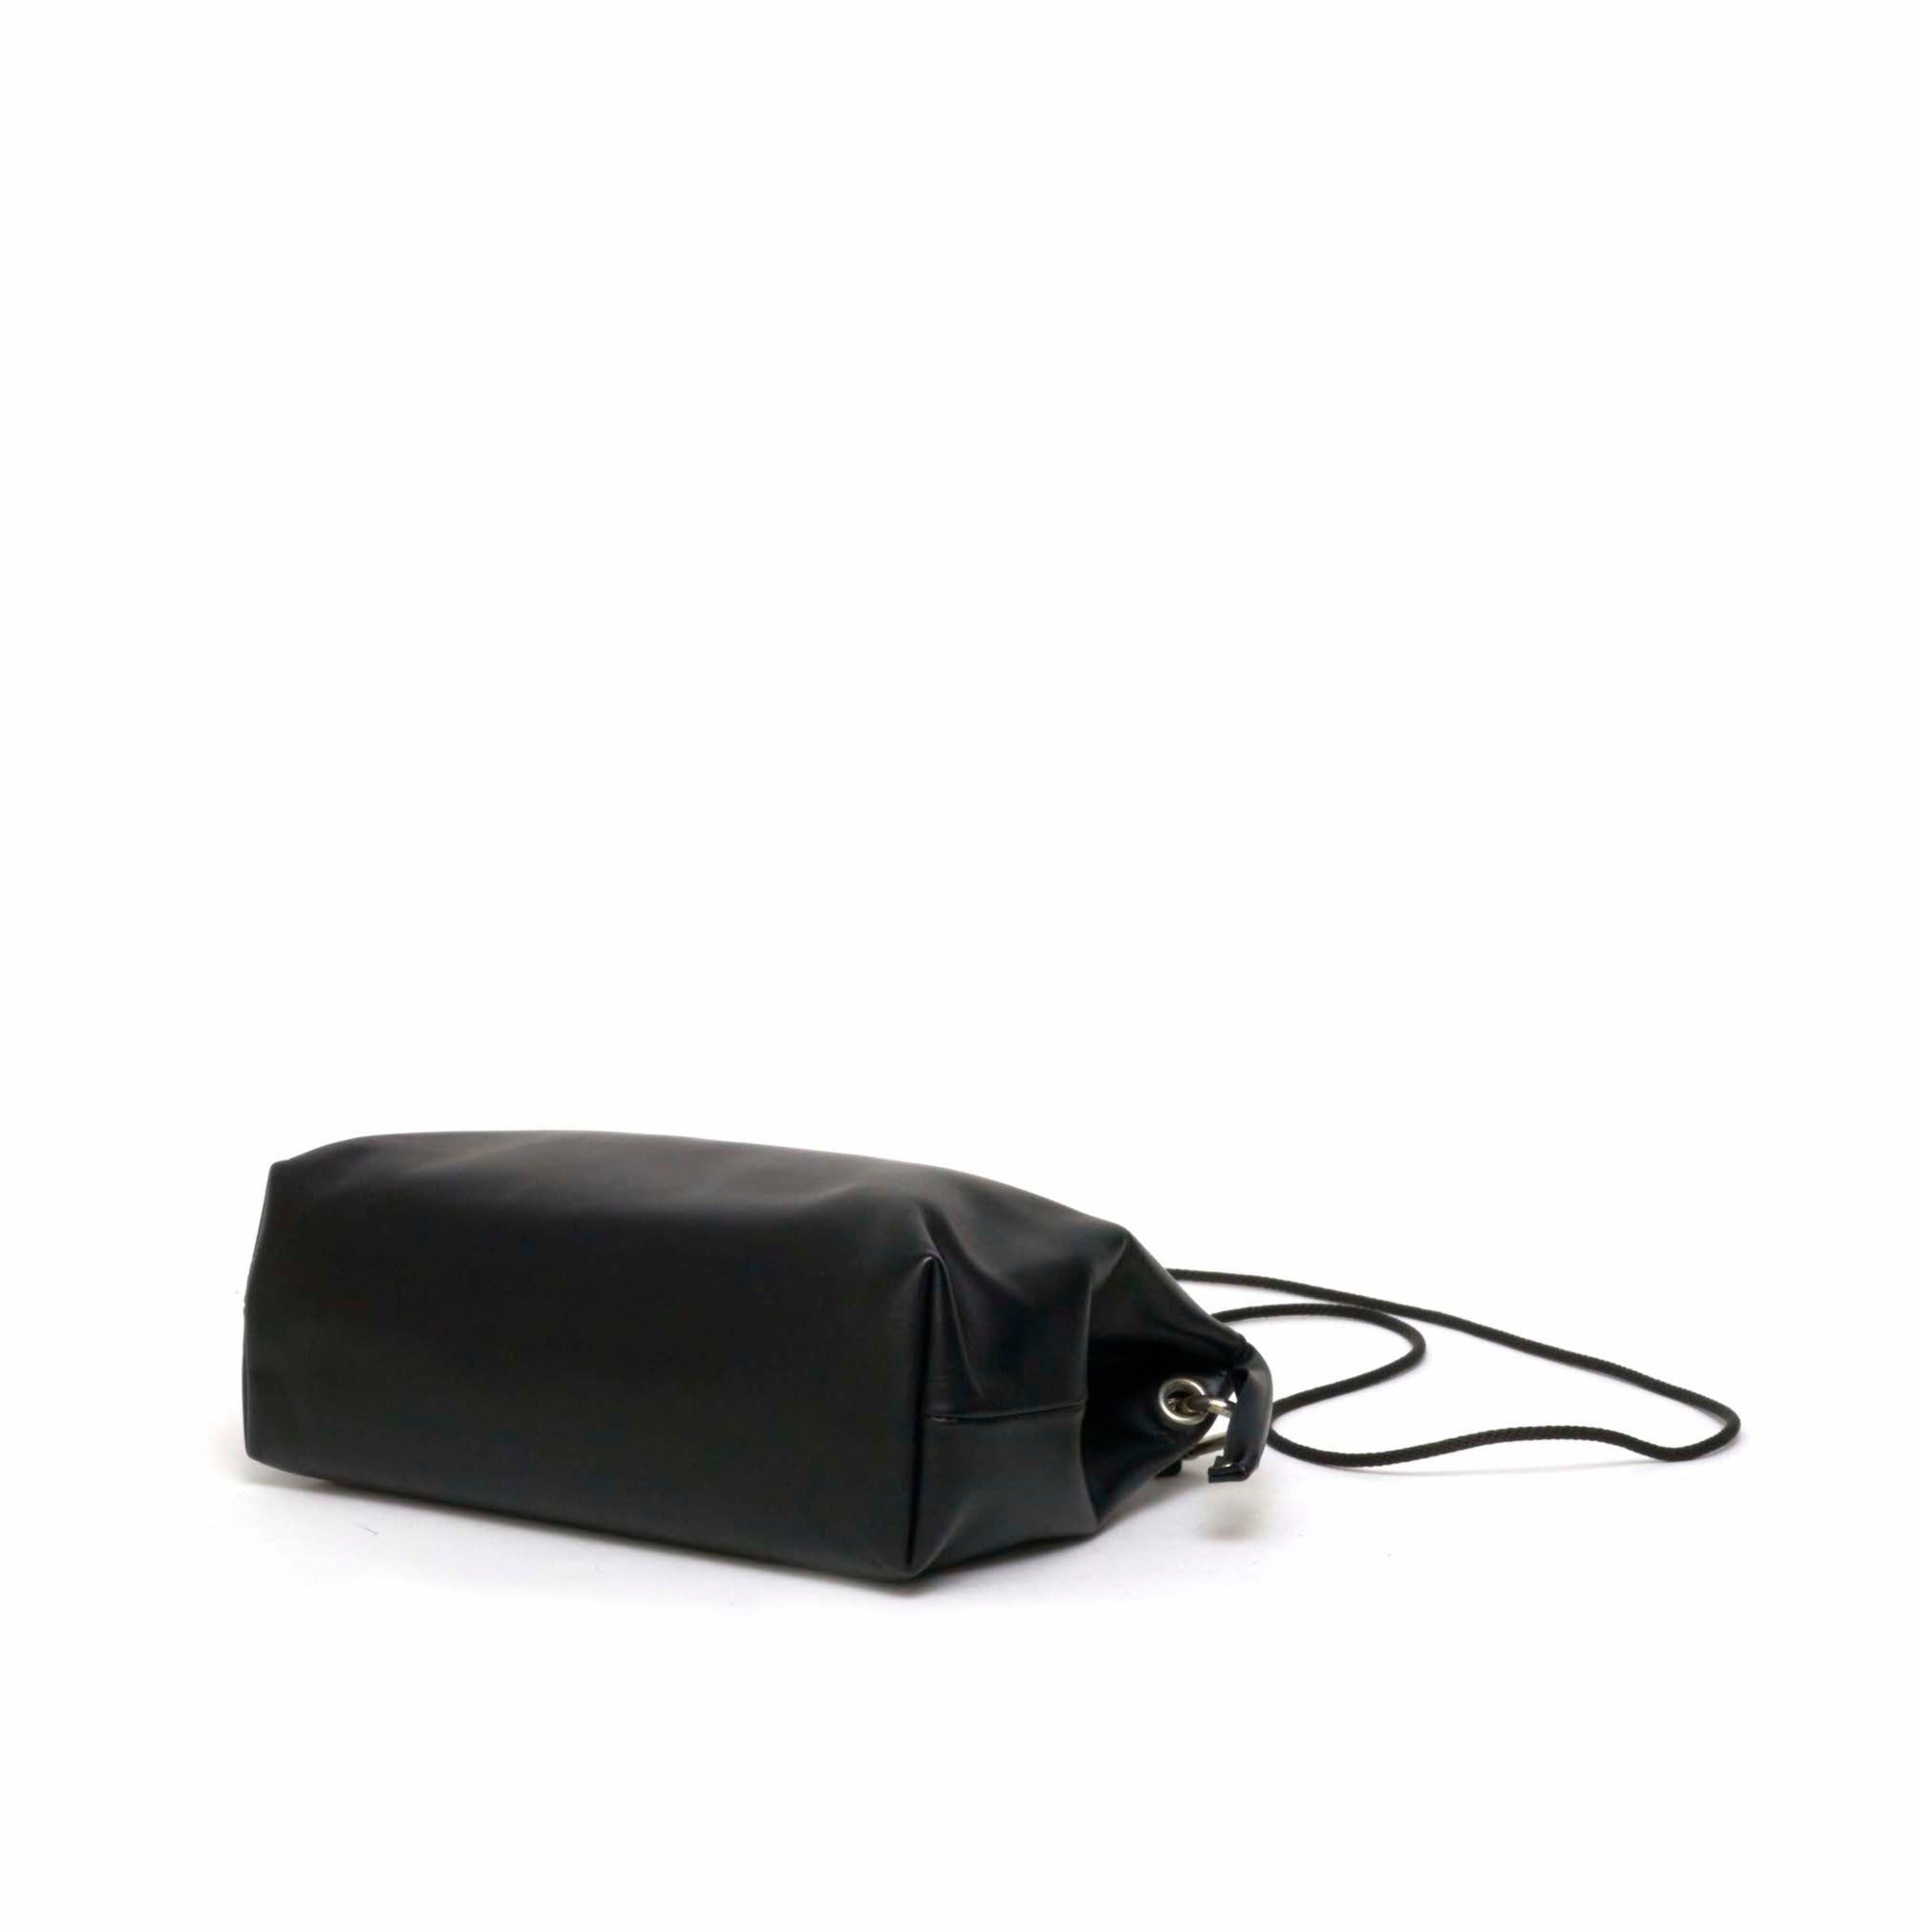 PAWL - RATCHET BAG / WATER REPELLENT LEATHER